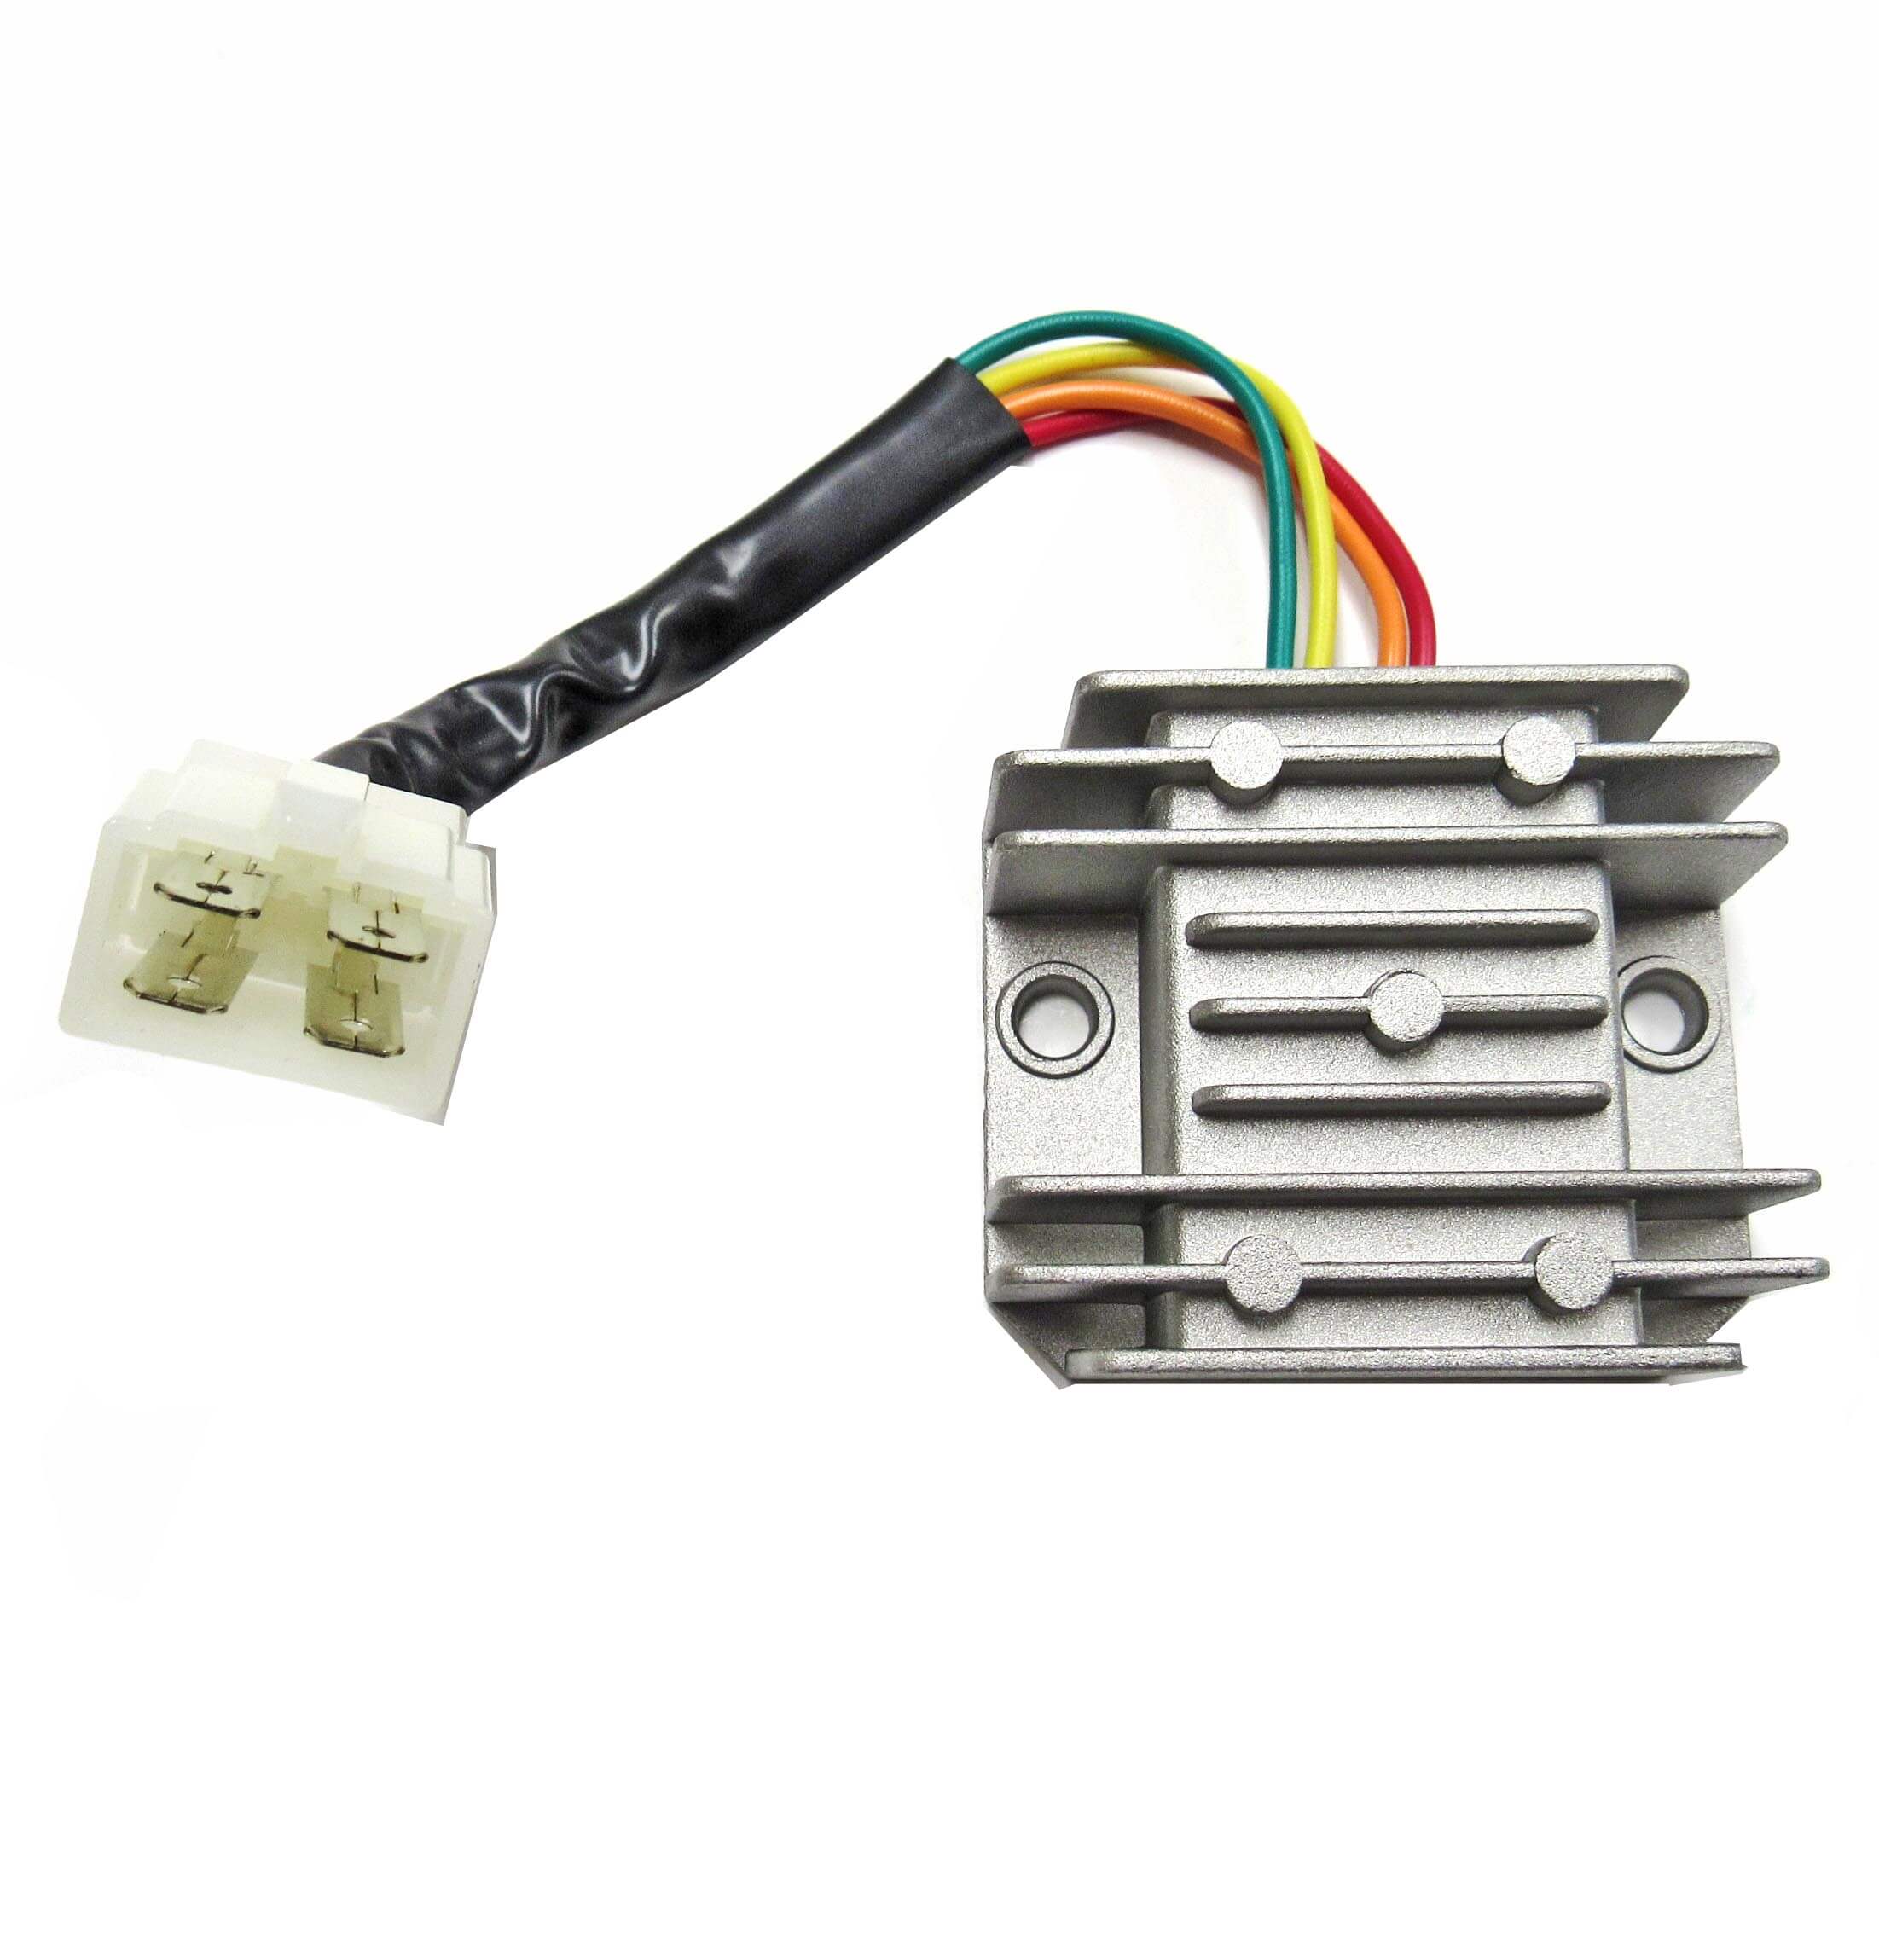 Voltage Regulator Rectifier CG Chinese ATV's, SCOOTERs 4 Pins in 4 Pin FM Jack 58x68 Bolts Ctr to Ctr 55mm - Click Image to Close